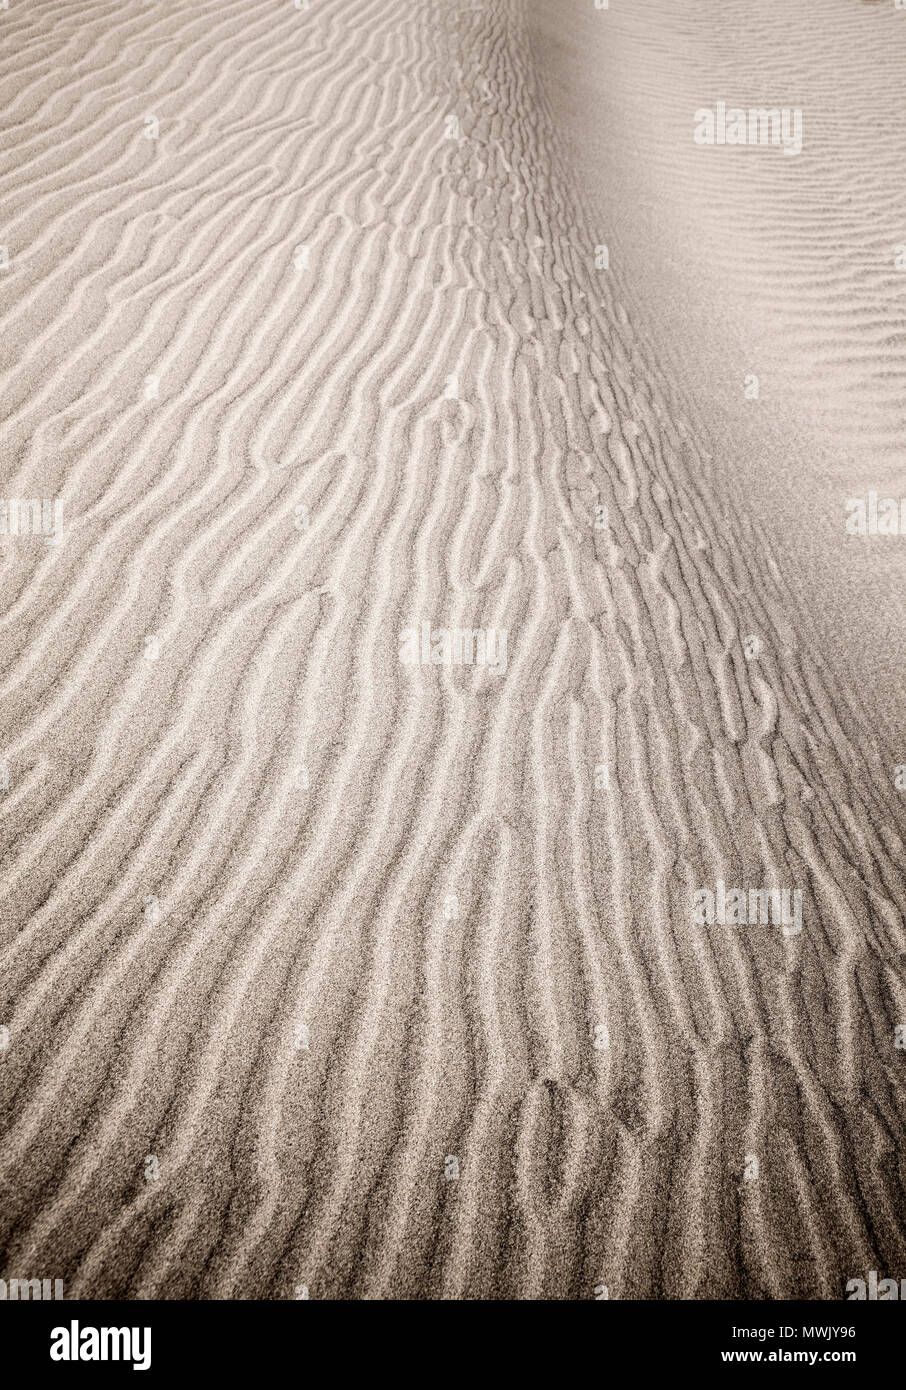 sand and wind patterns on dune surface. Pattern is formed by two types of sand grains - dark, small and lightweight and larger lighter and heavier one Stock Photo